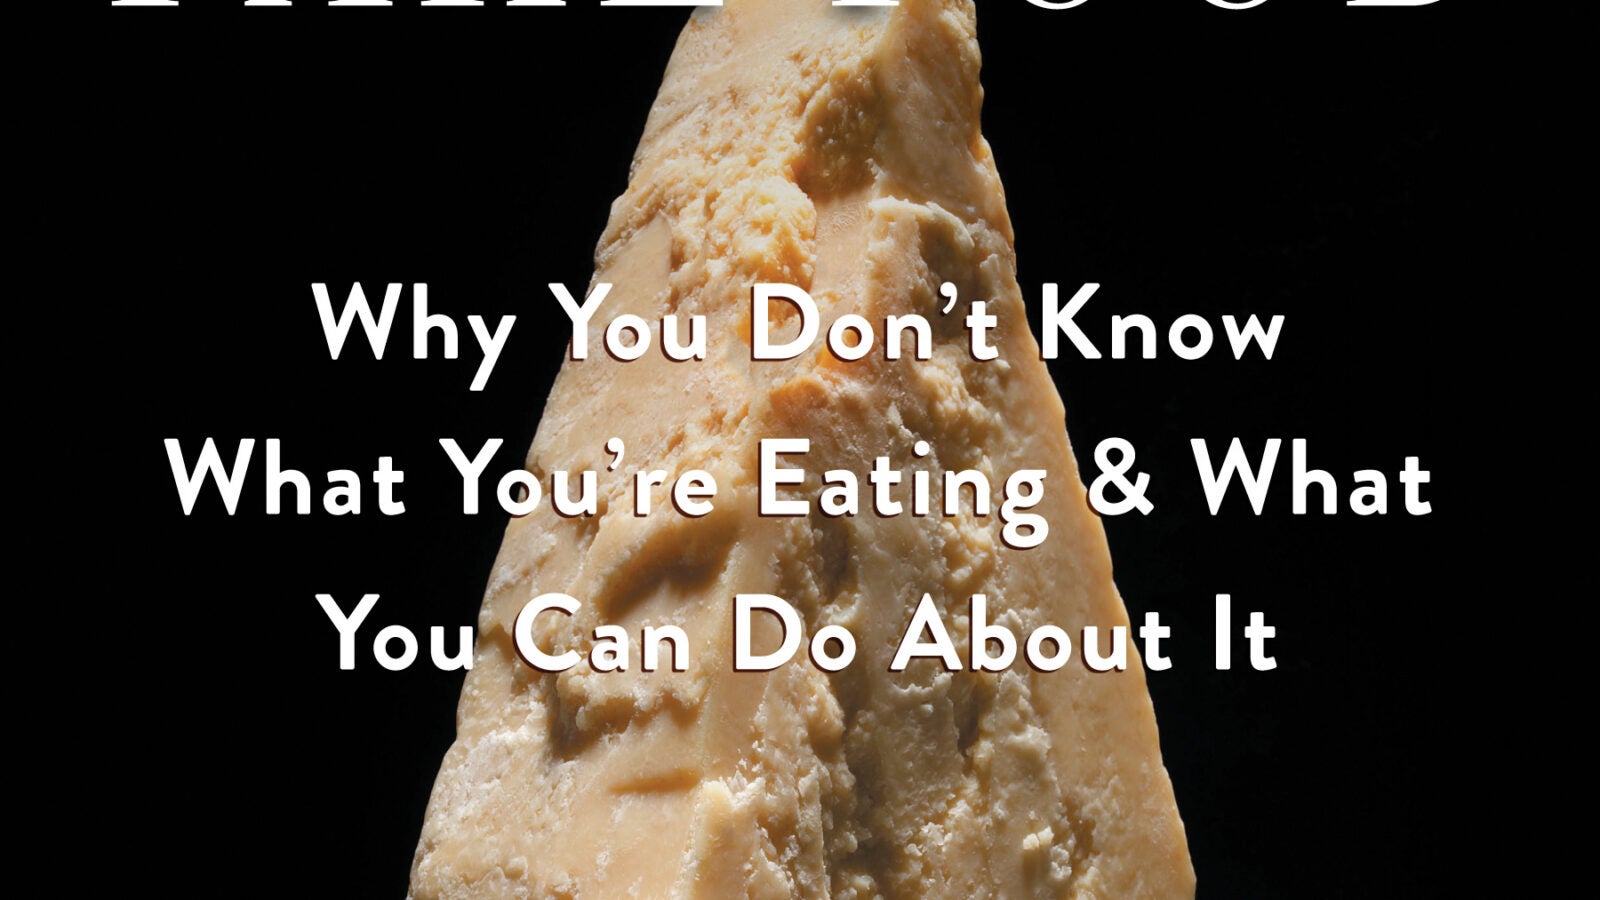 Real Food/Fake Food: Why You Don’t Know What You’re Eating & What You Can Do About It book cover